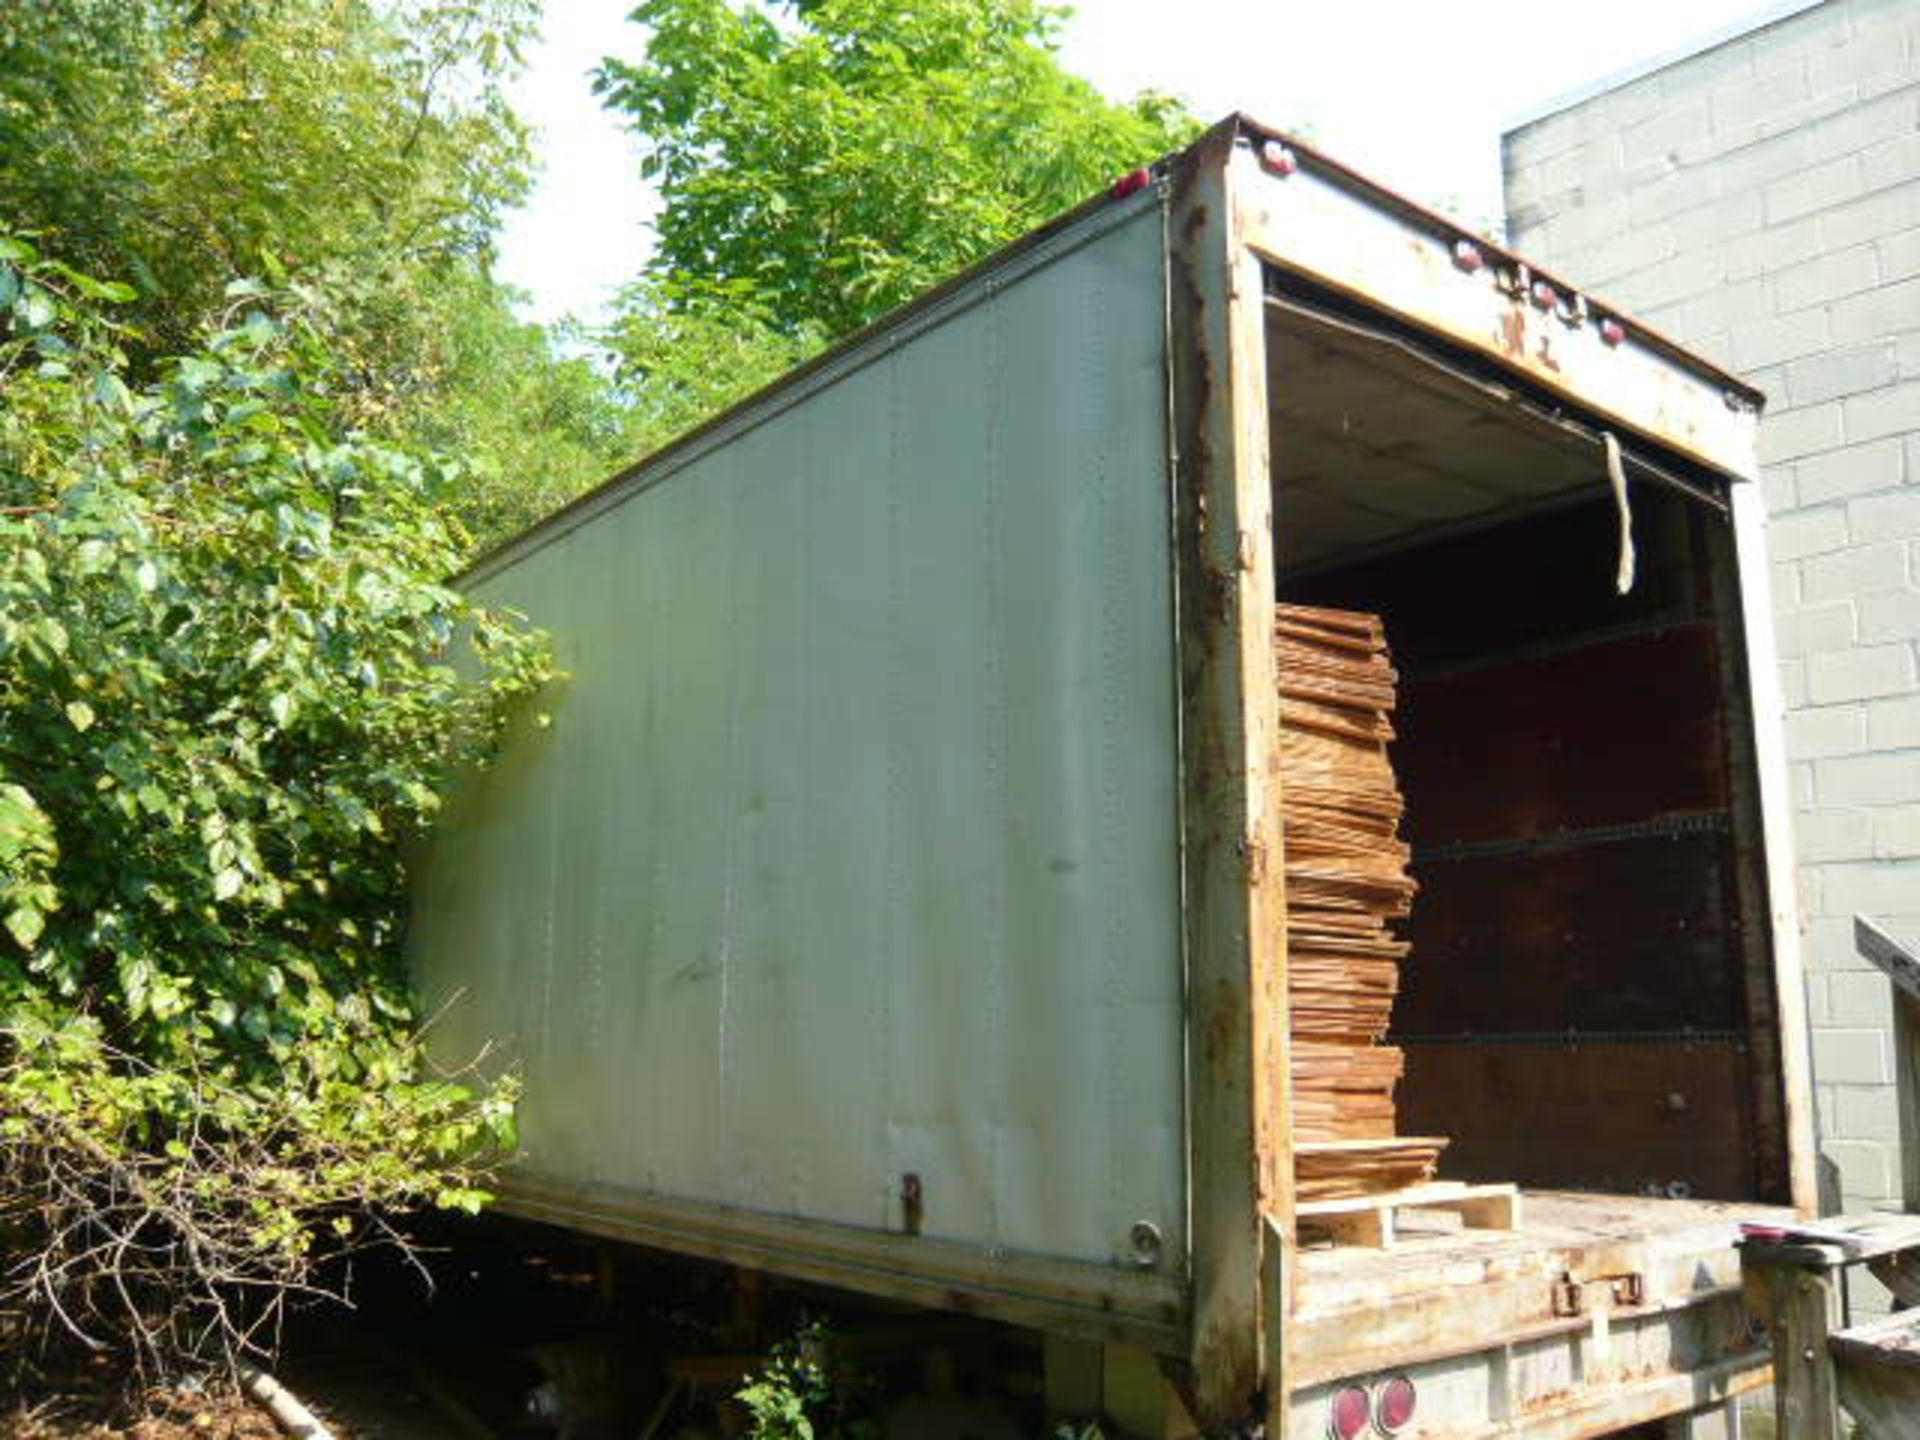 STORAGE TRAILER "AS IS; NO TITLE"